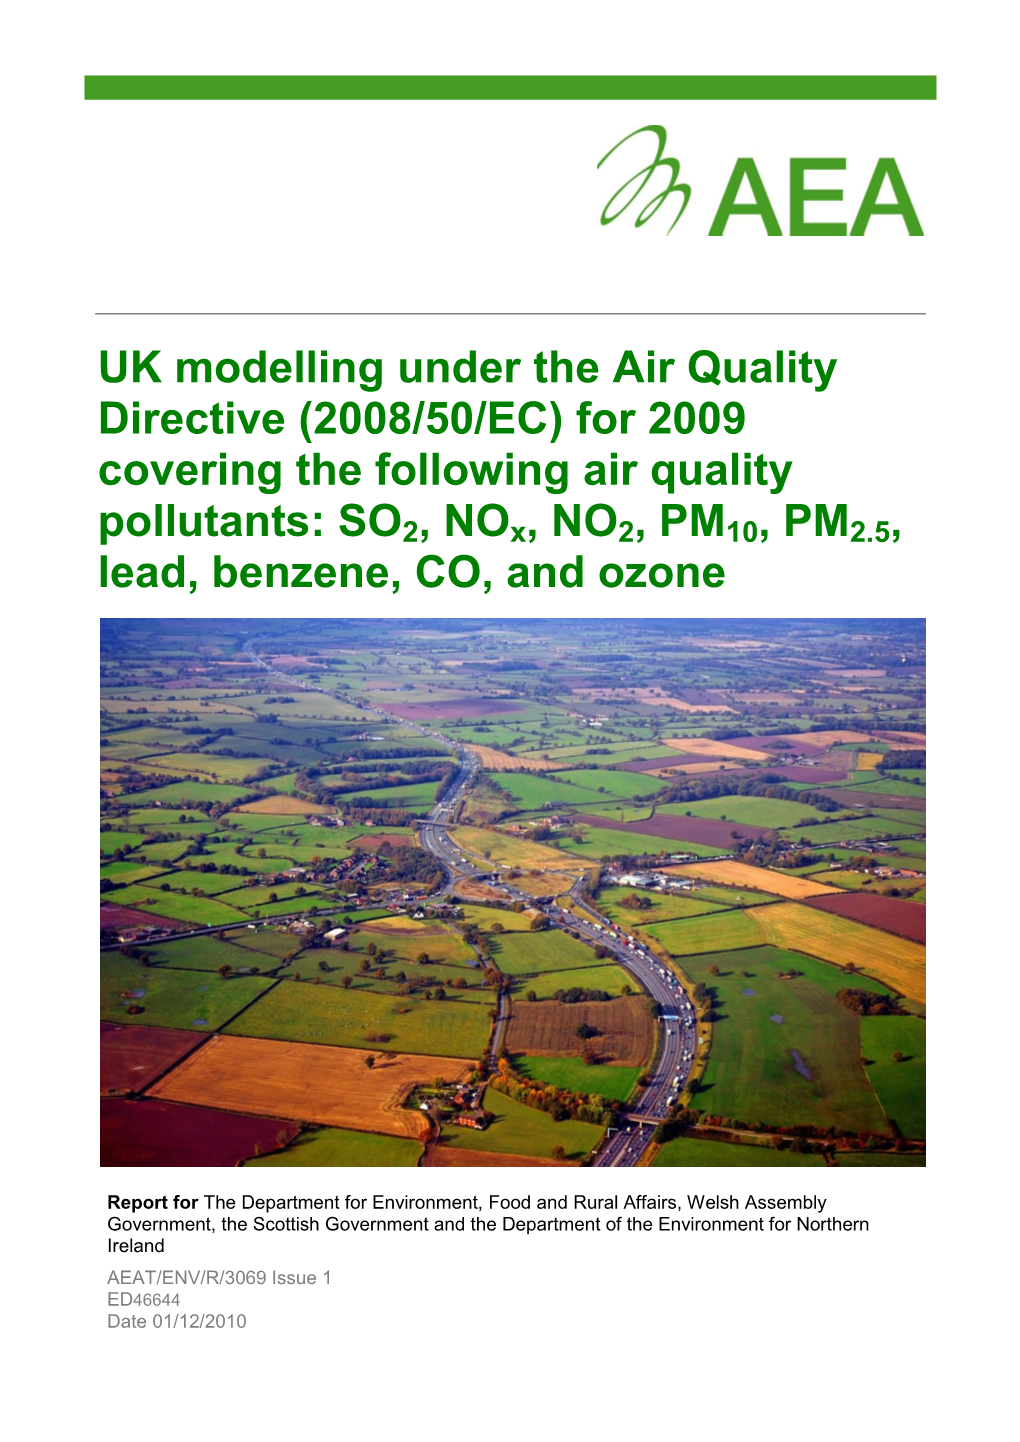 UK Modelling Under the Air Quality Directive (2008/50/EC) for 2009